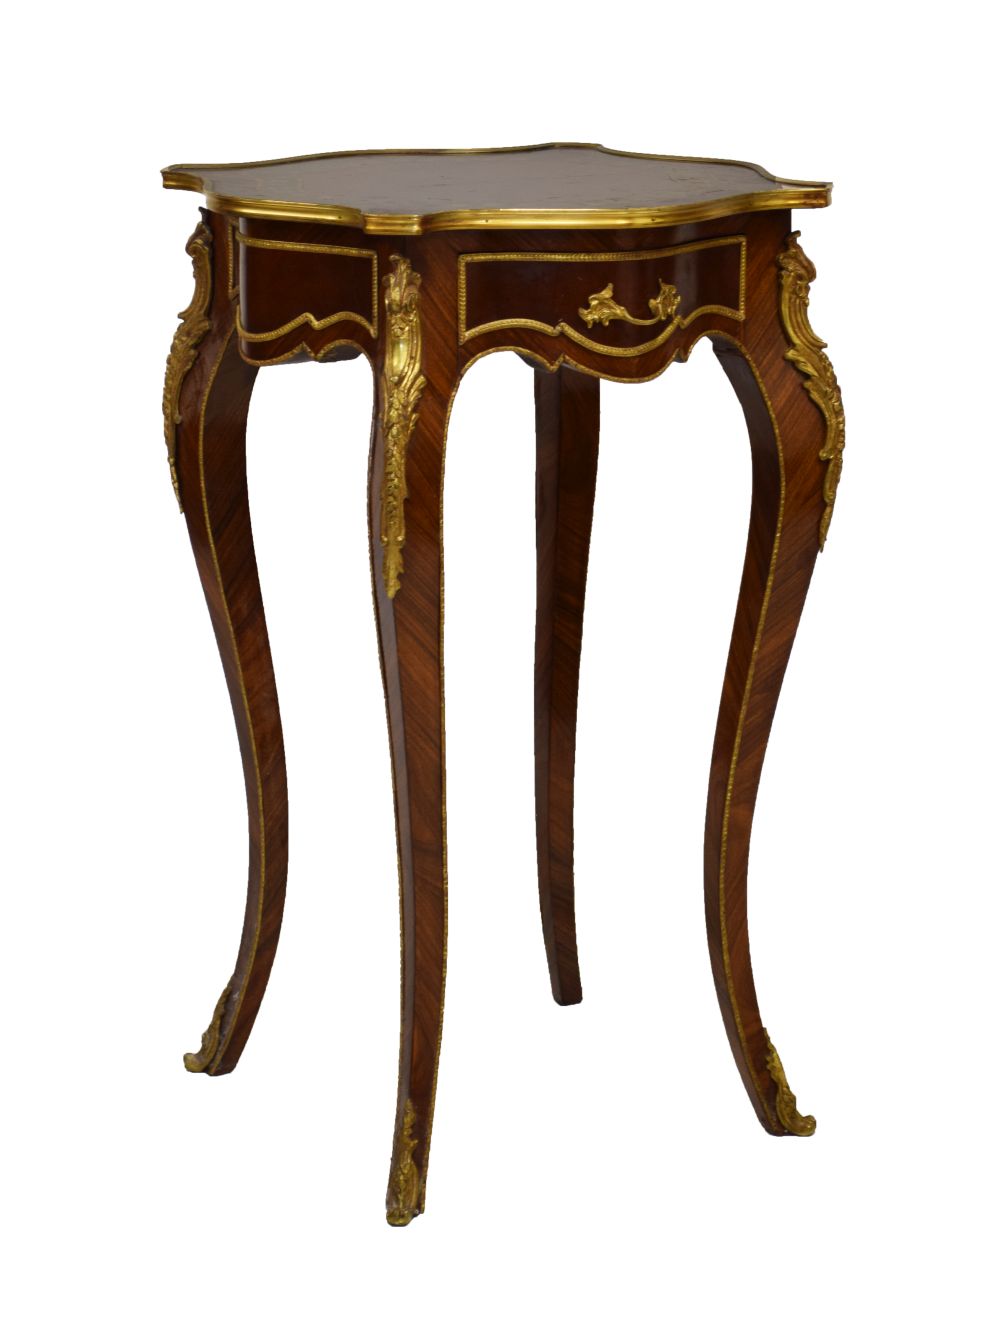 20th Century kingwood, marquetry and gilt metal-mounted occasional table or stand, of serpentine